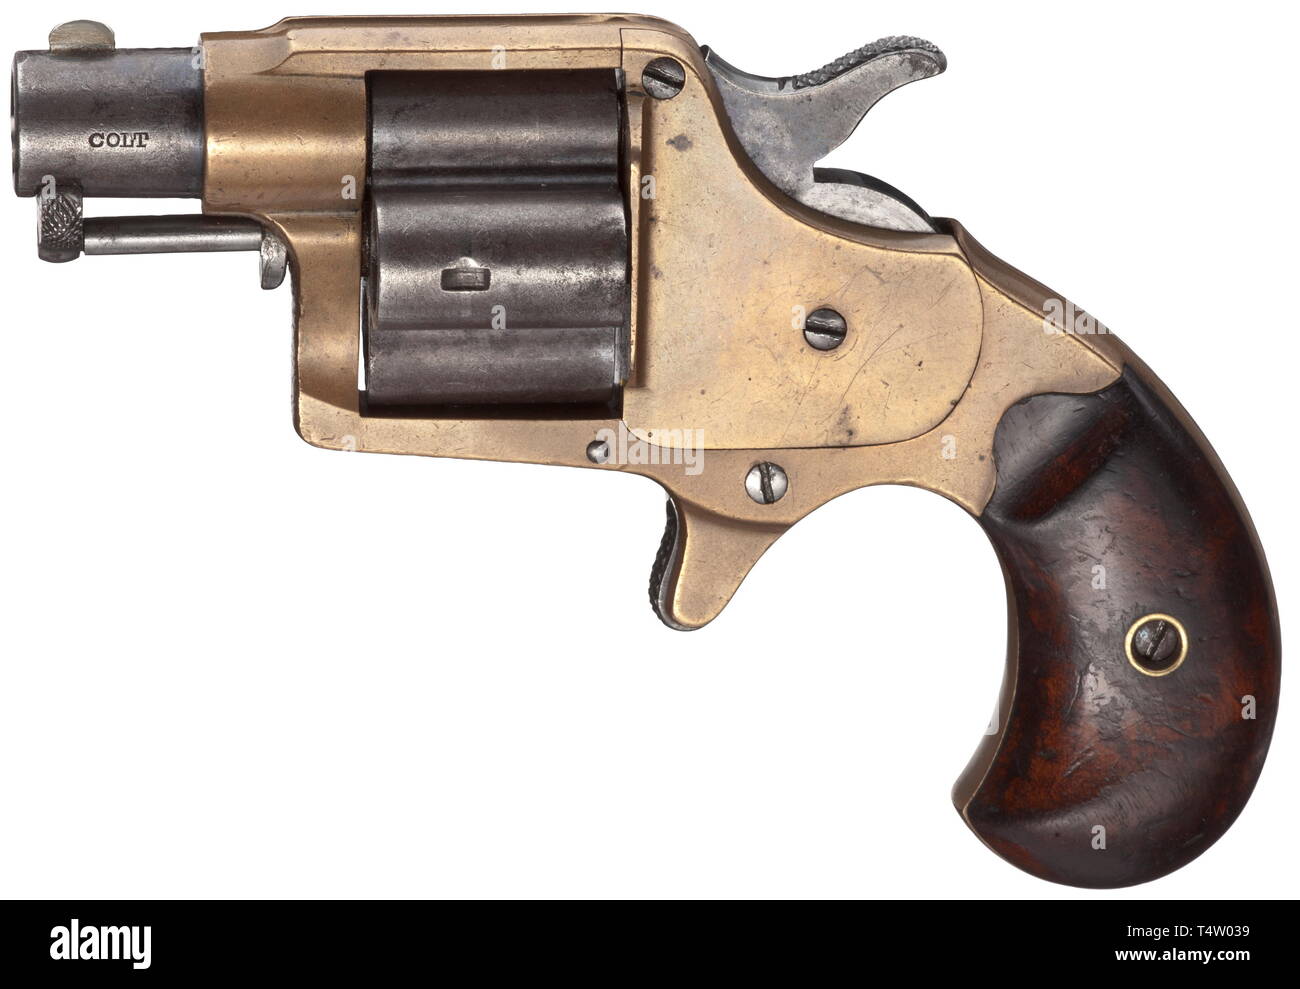 A Colt Cloverleaf House Model, cal..41 RF, no. 2847. Matching numbers. Seven grooves with good rifling, length 1-1/2'. Nickel-silver front sight. Four shots. Manufactured in 1871. Sole inscription 'COLT' on left side of barrel. Barrel, cylinder and hammer blued, patinated steel. Brass frame with minimal remnants of nickel. Smooth walnut grip panels. Very good overall condition. The 1-1/2'-barrel model is rare, most models had a 3'-barrel. The weapon on offer originates from the Robert Q. Sutherland Collection and is shown and described in Wilson,, Additional-Rights-Clearance-Info-Not-Available Stock Photo